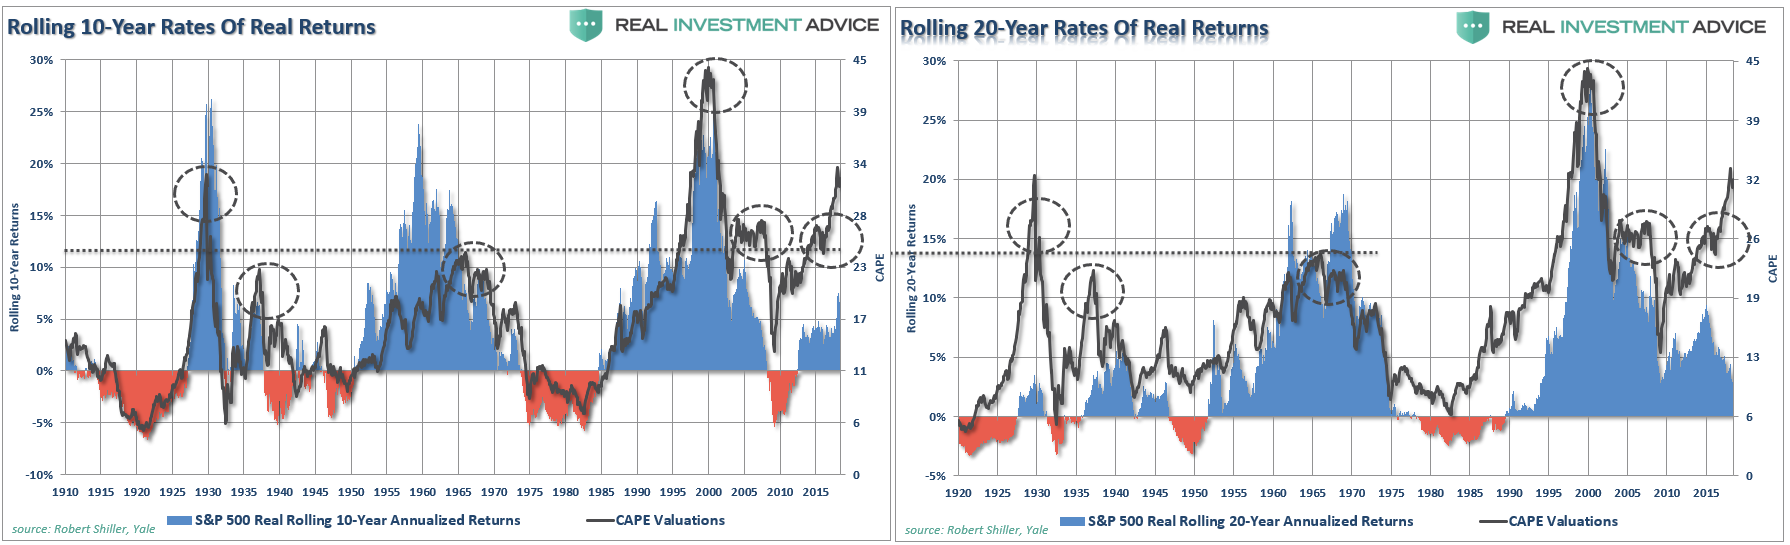 Rolling 10-YEar Rates Of Real Returns